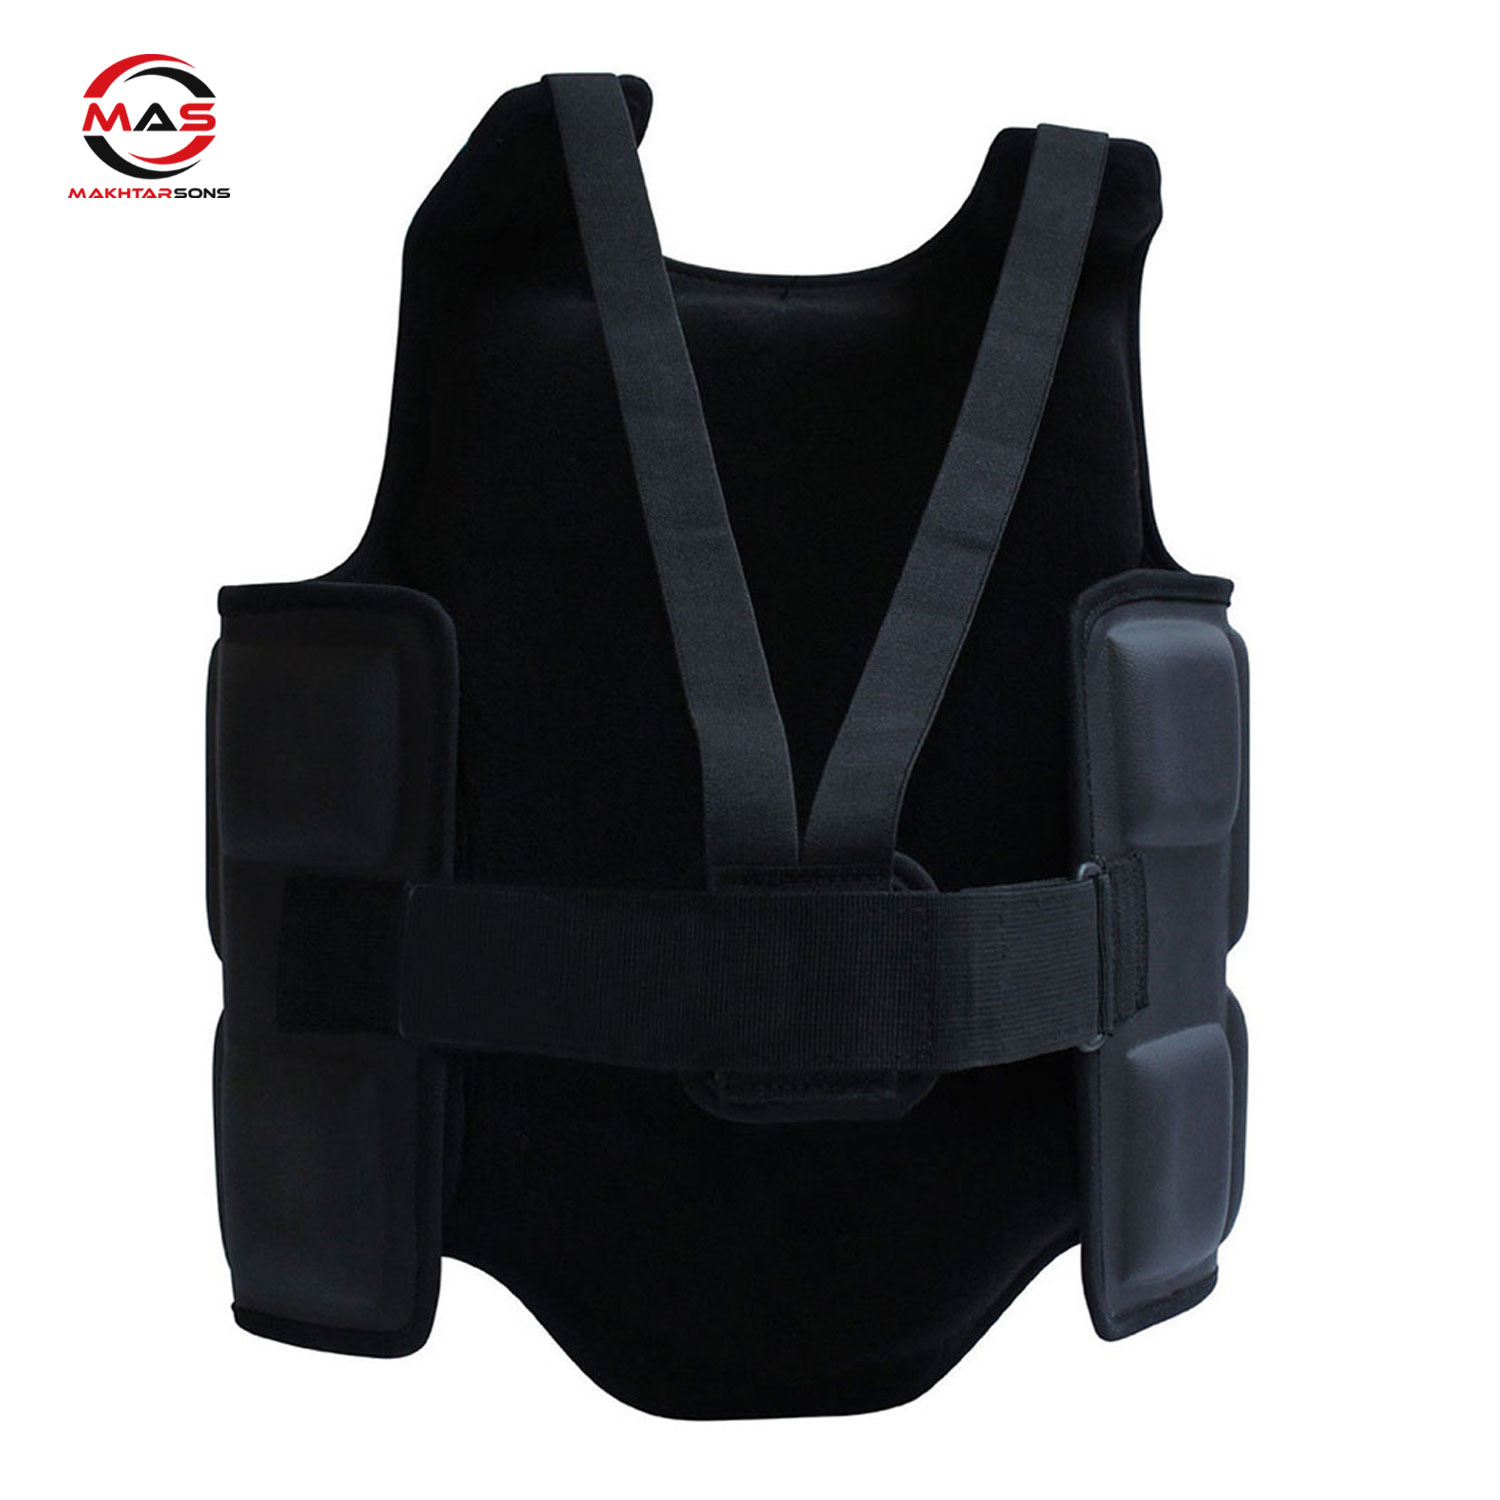 BODY CHEST PROTECTOR | MAS 283